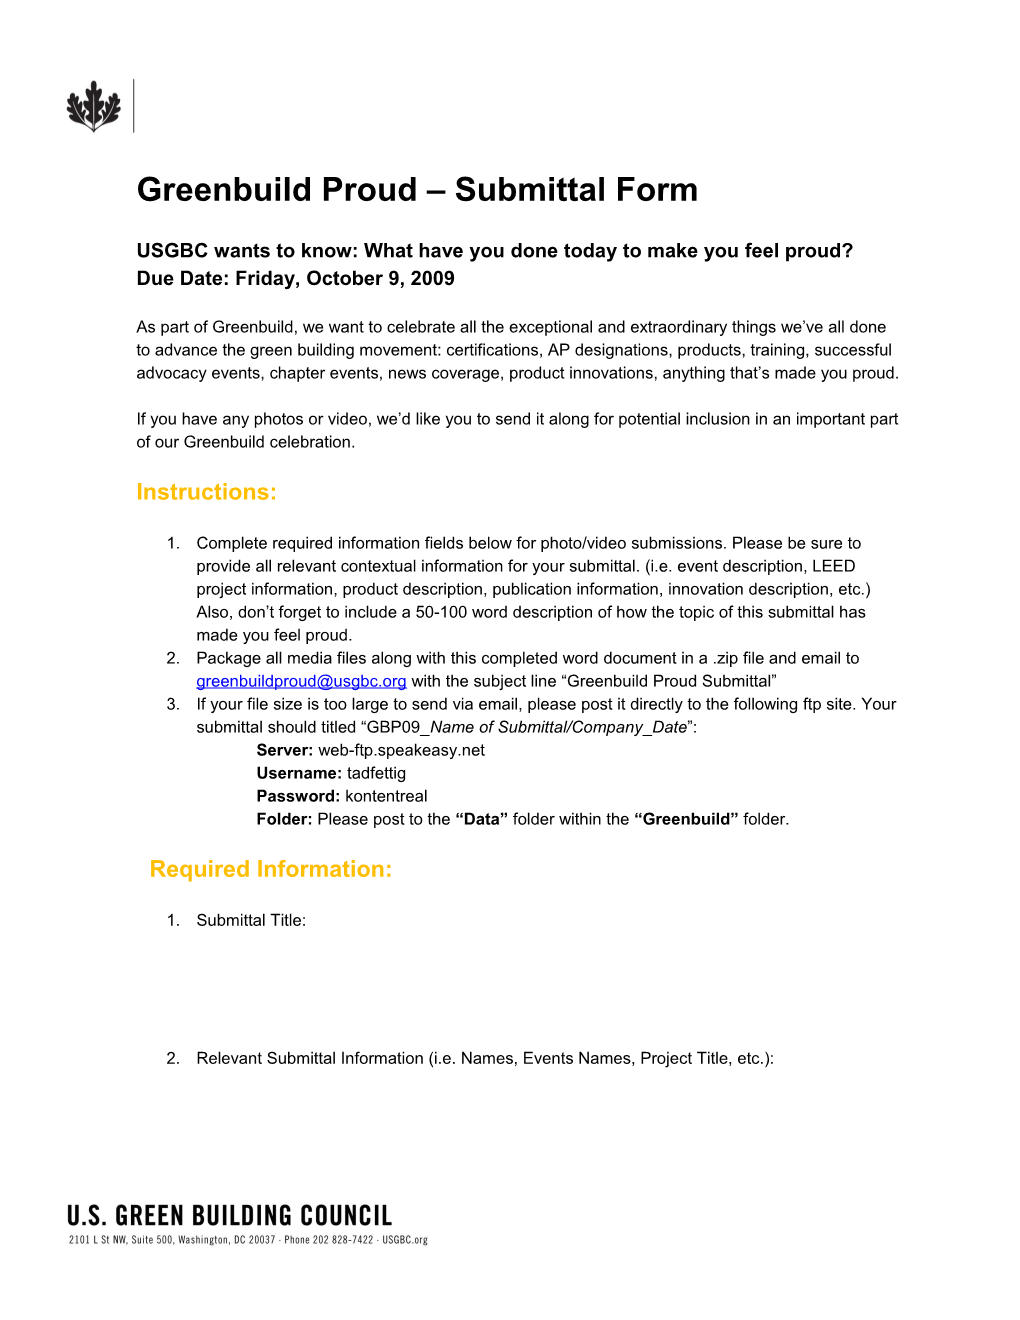 Greenbuild Proud Submittal Form